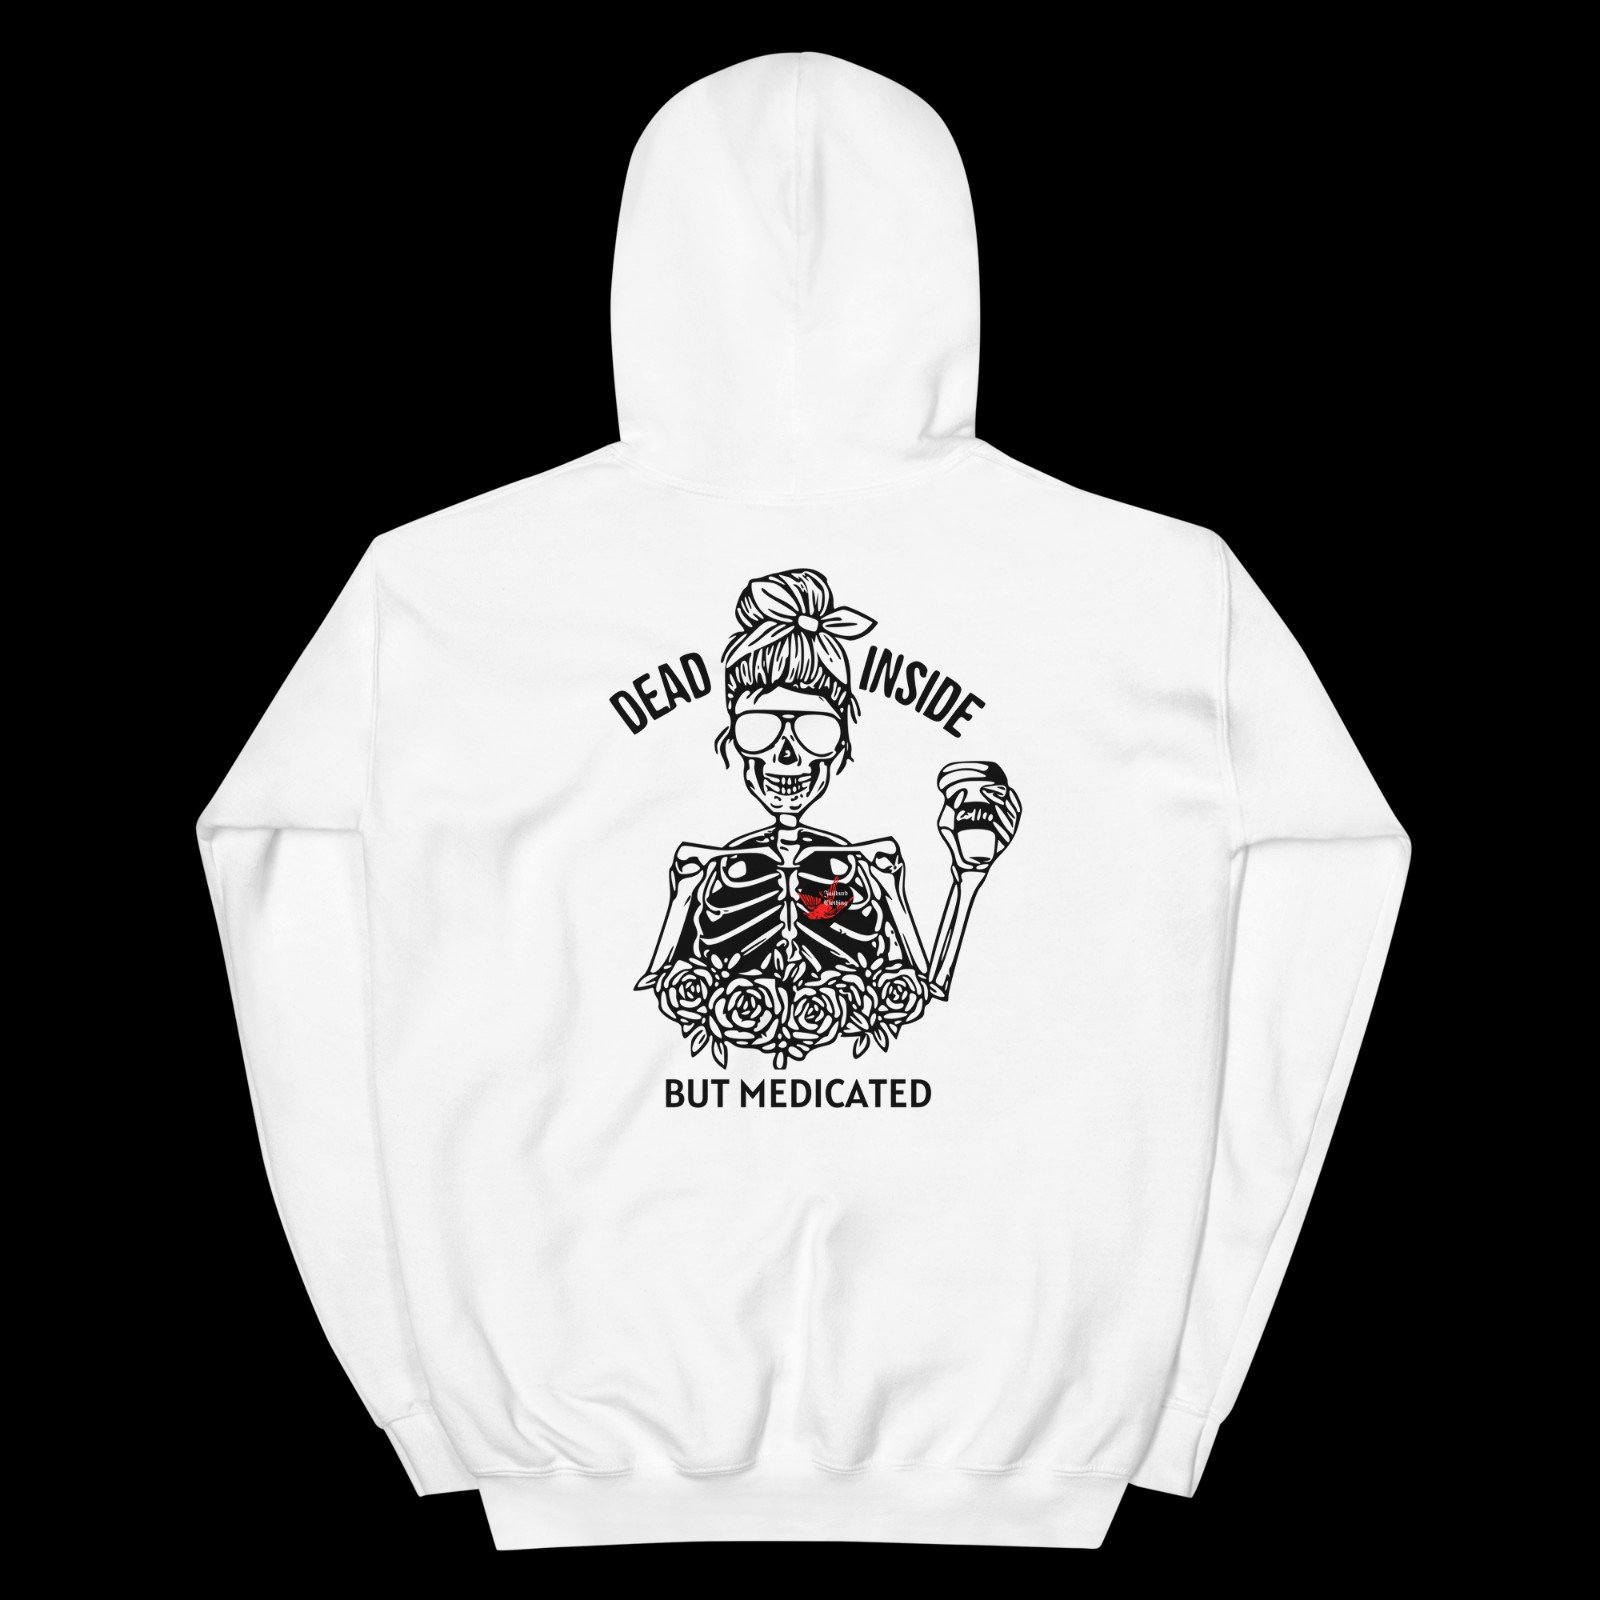 save up to 70% Dead but medicated hoodie pEkWZMpCB Great